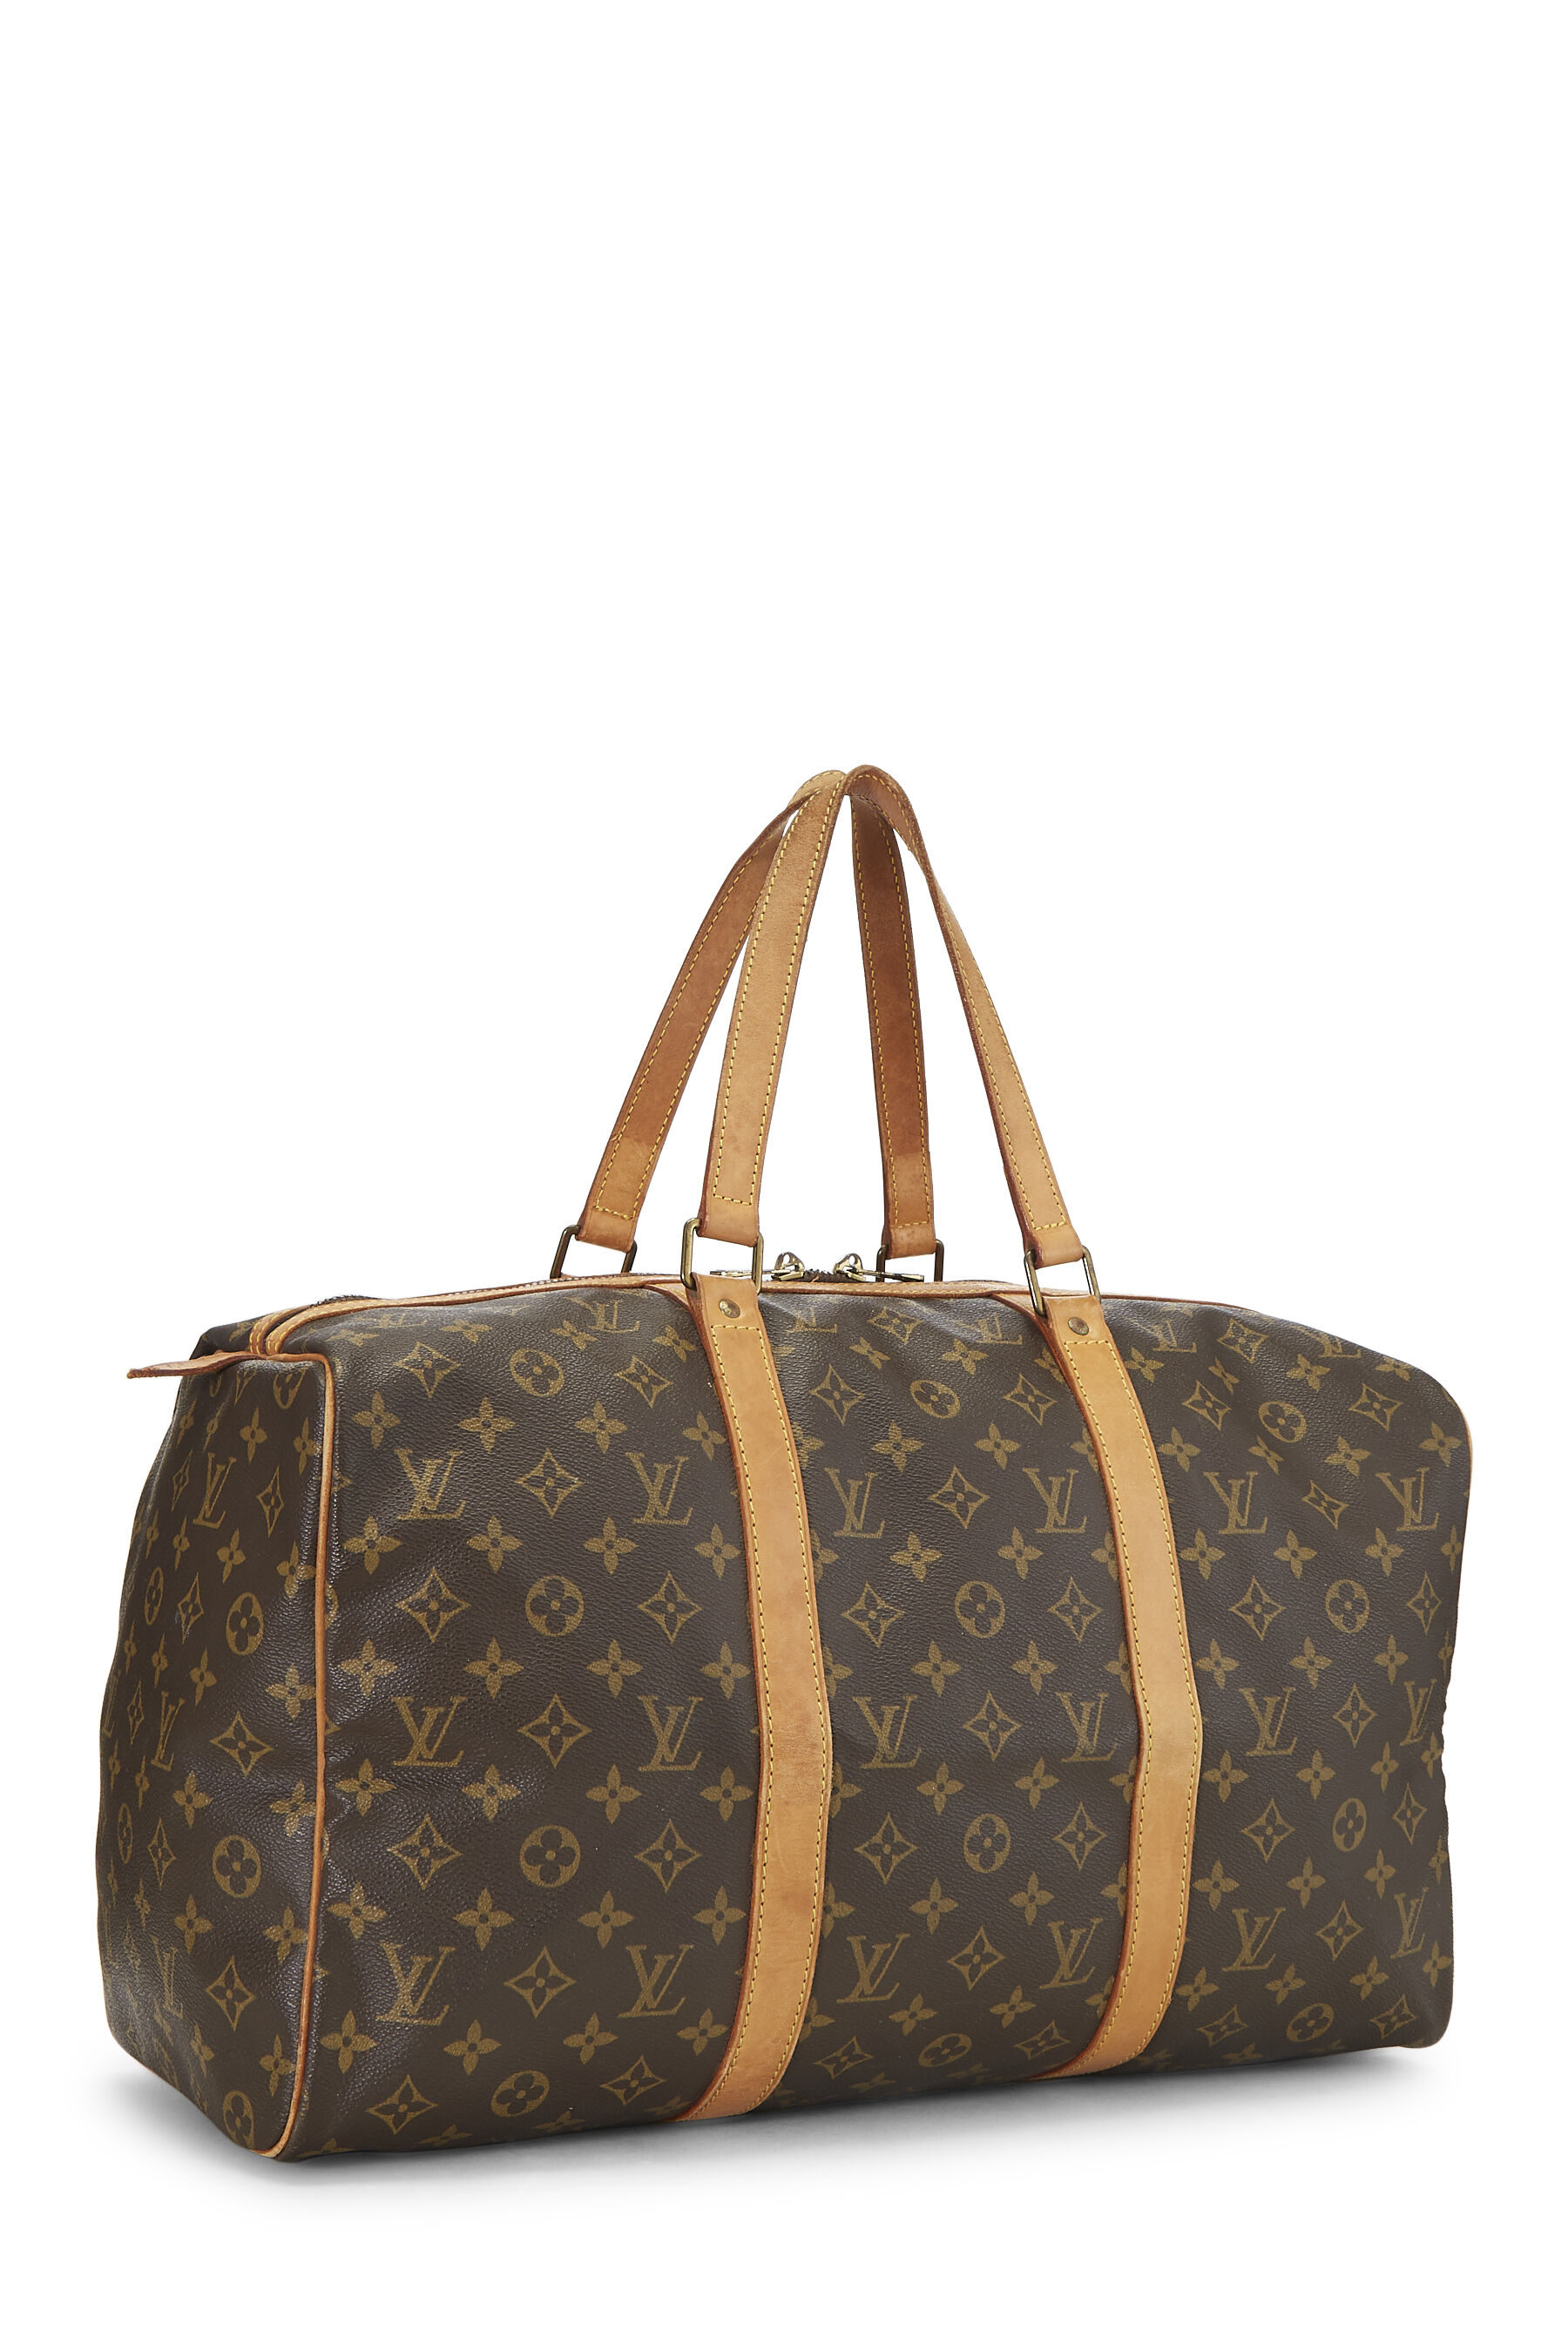 Sold at Auction: Louis Vuitton Sac Souple 45 Travel Bag, in a monogram  coated canvas, with vachetta leather accents and golden brass hardware, in  a b